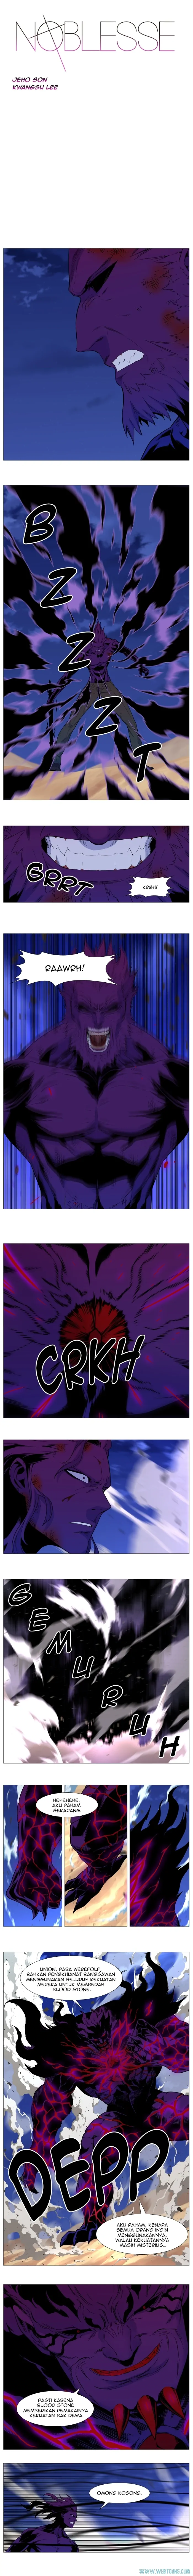 Noblesse Chapter 538 - 37